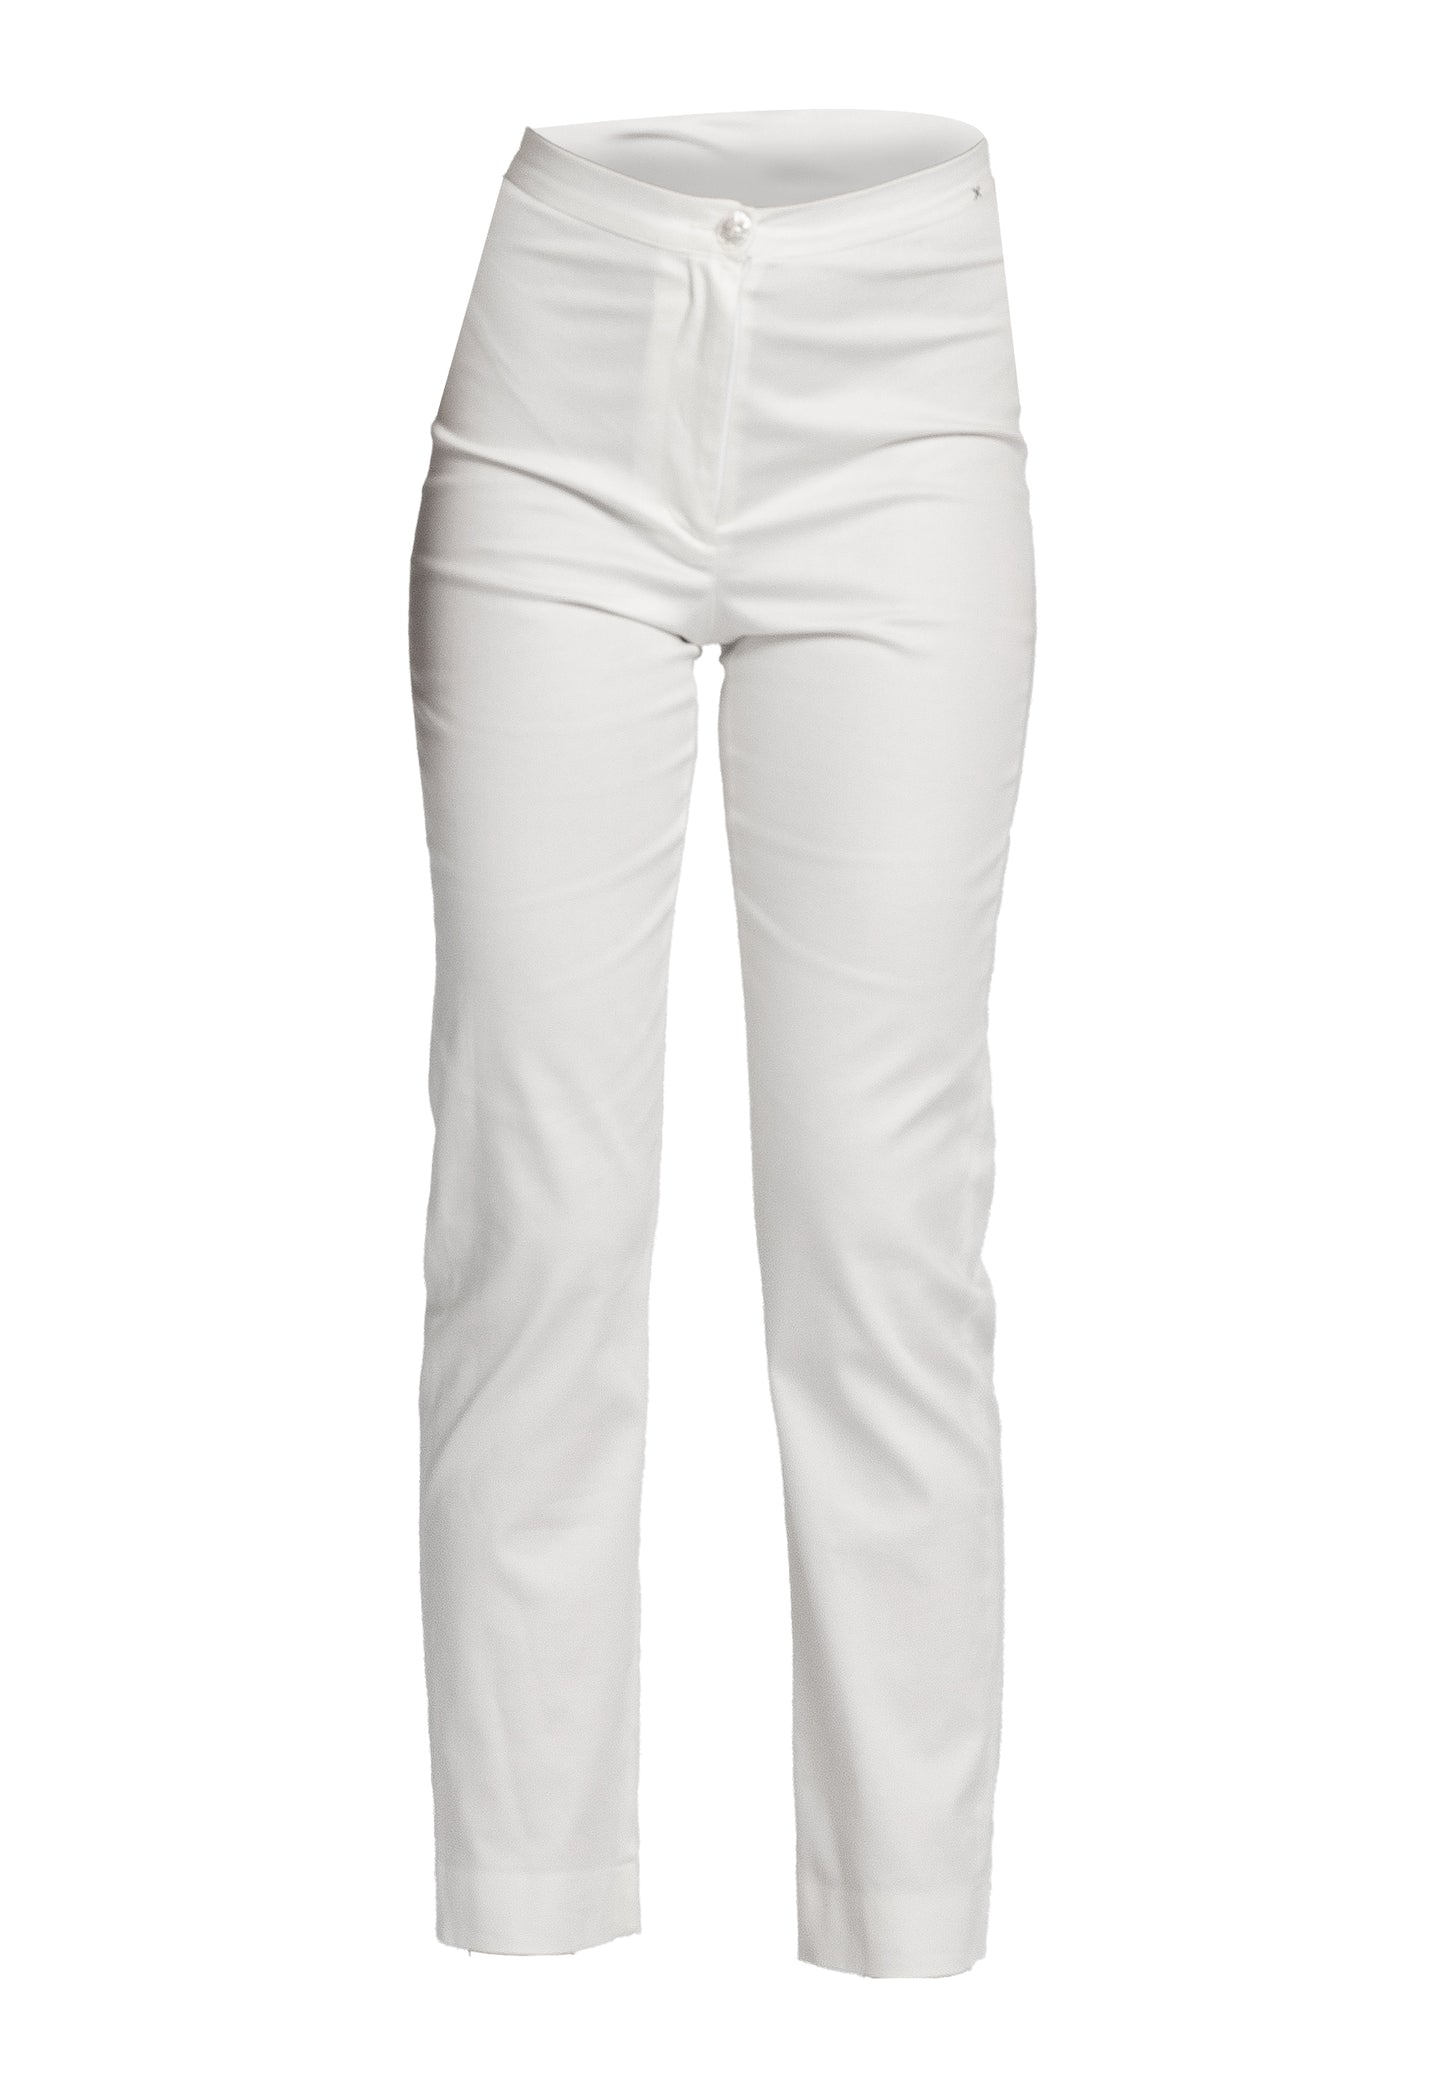 Primula Slim Fit Pants - White Stretch Cotton, Ankle-Length Leg, Zip and Button Front Opening